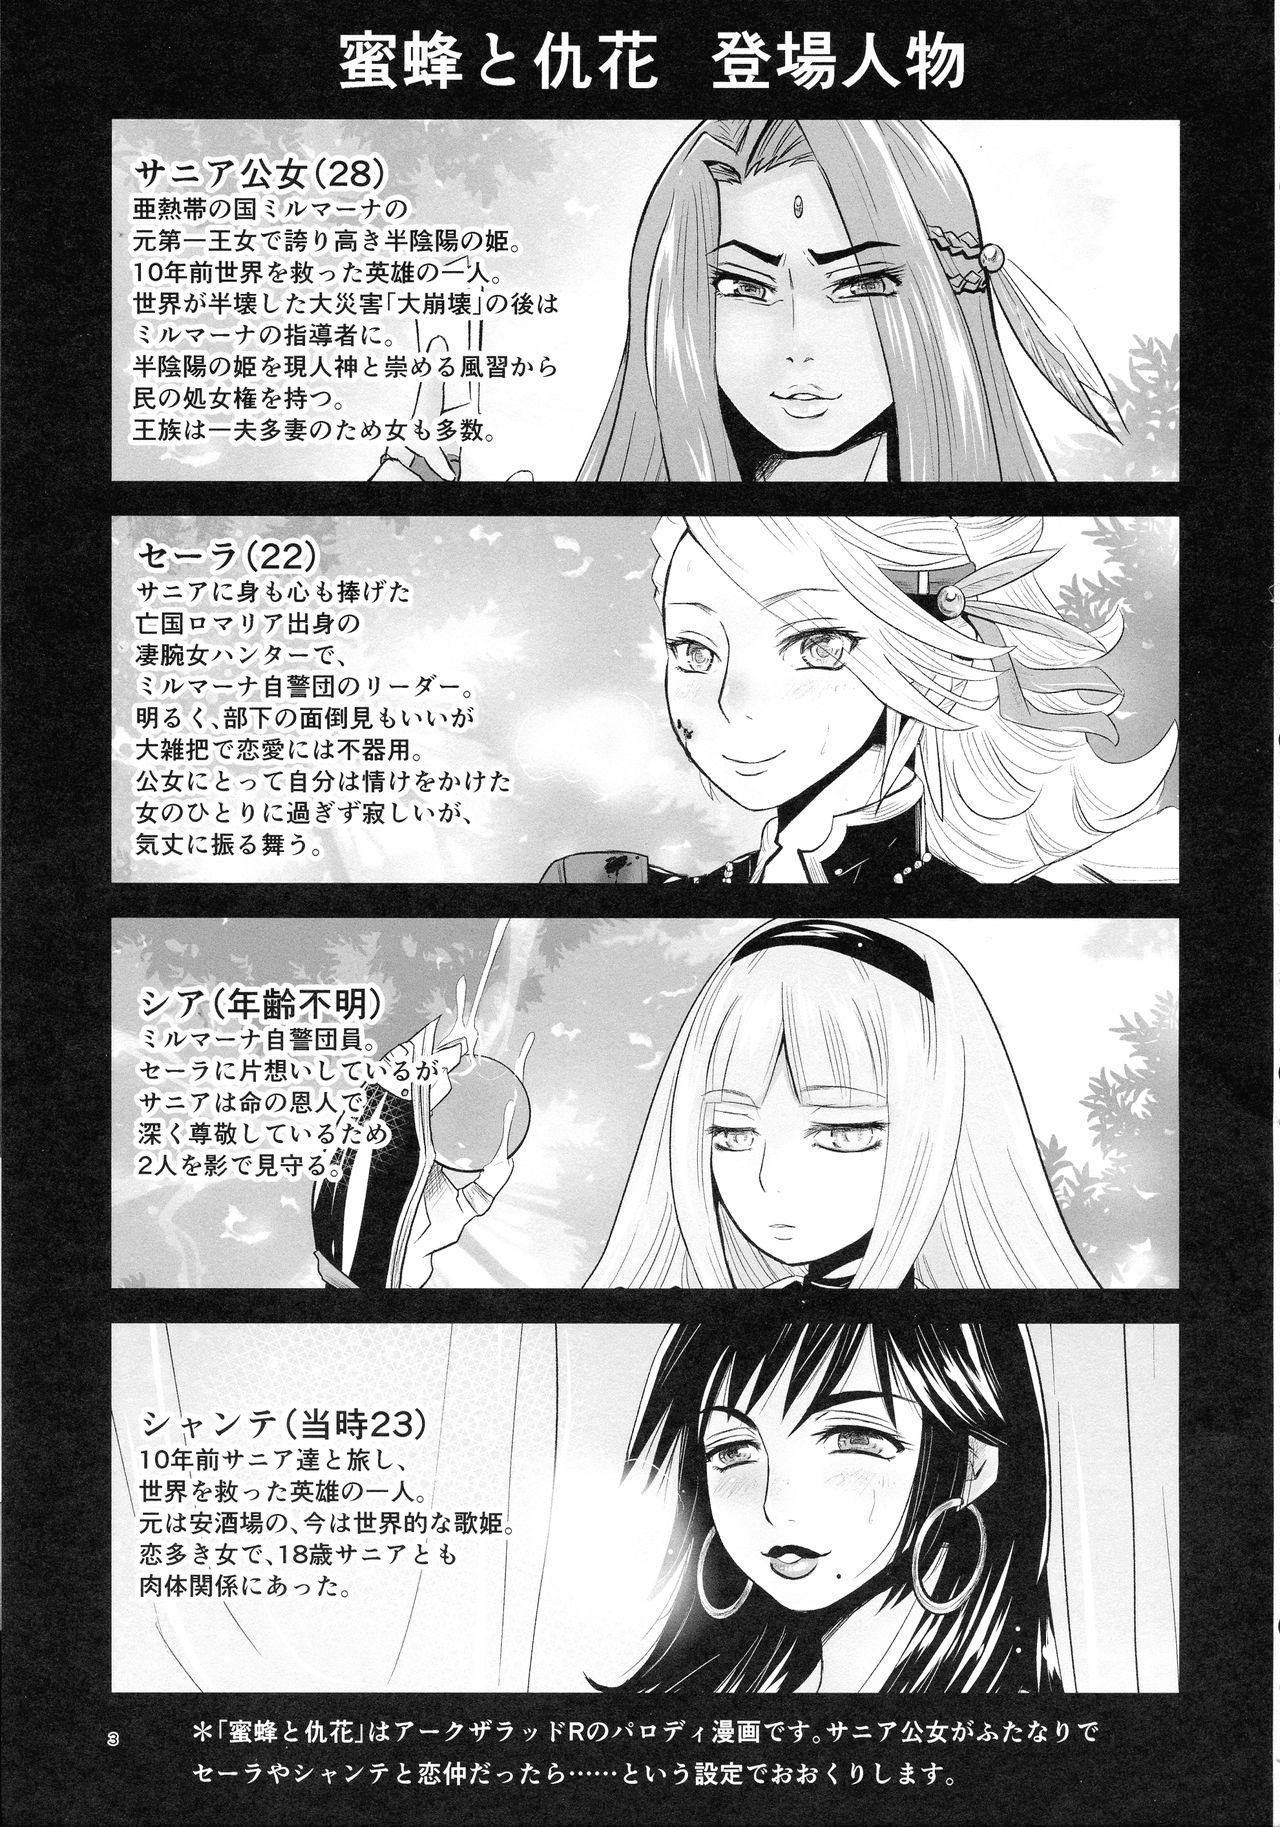 Sharing Mitsubachi to Ada Hana Zenpen - Arc the lad Shaved - Page 4